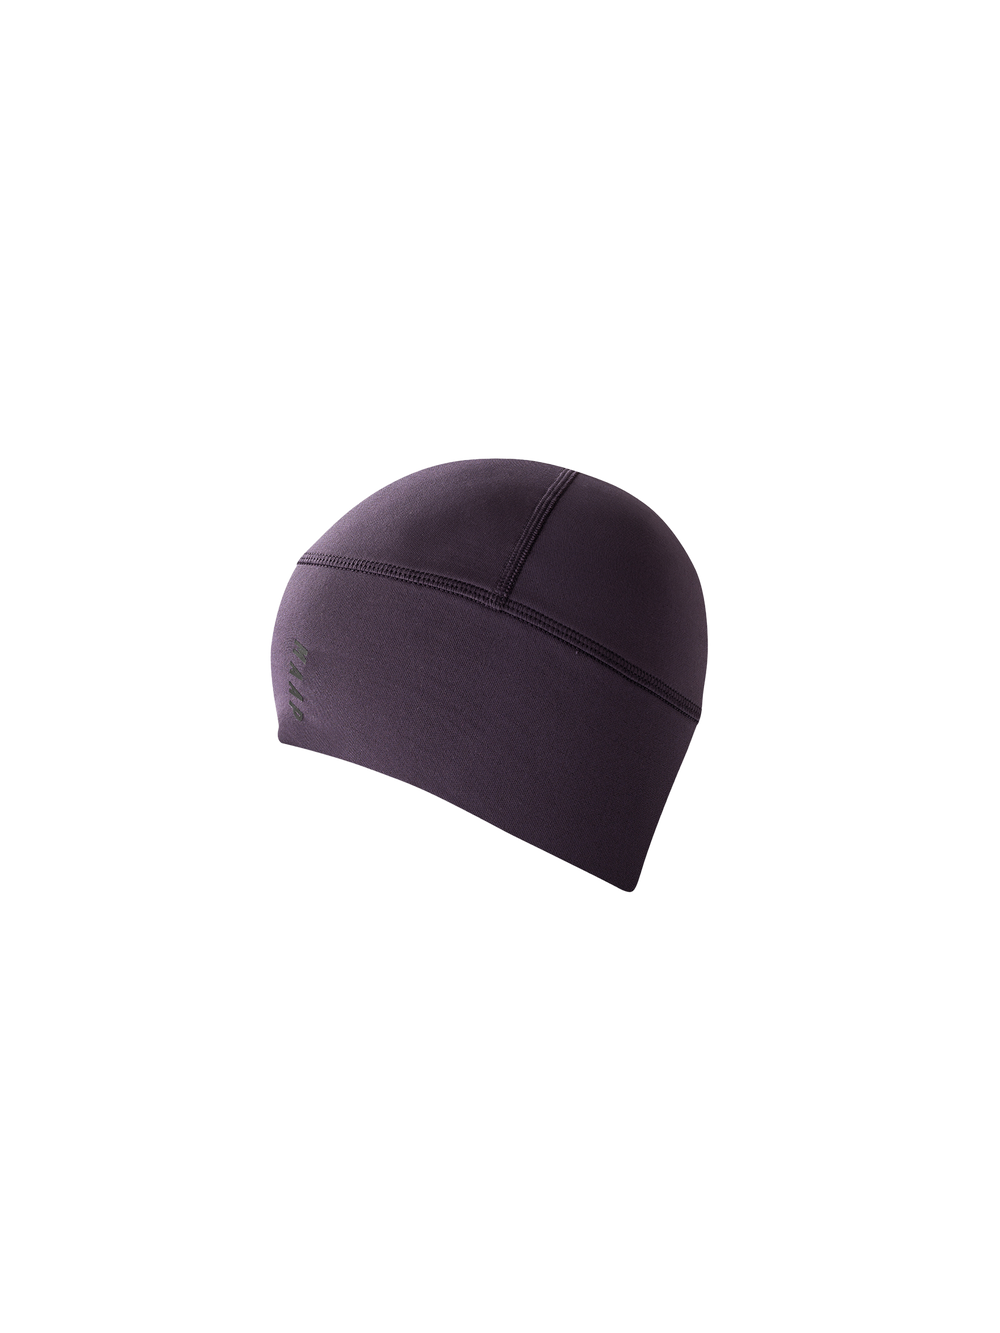 Product Image for Skull Cap